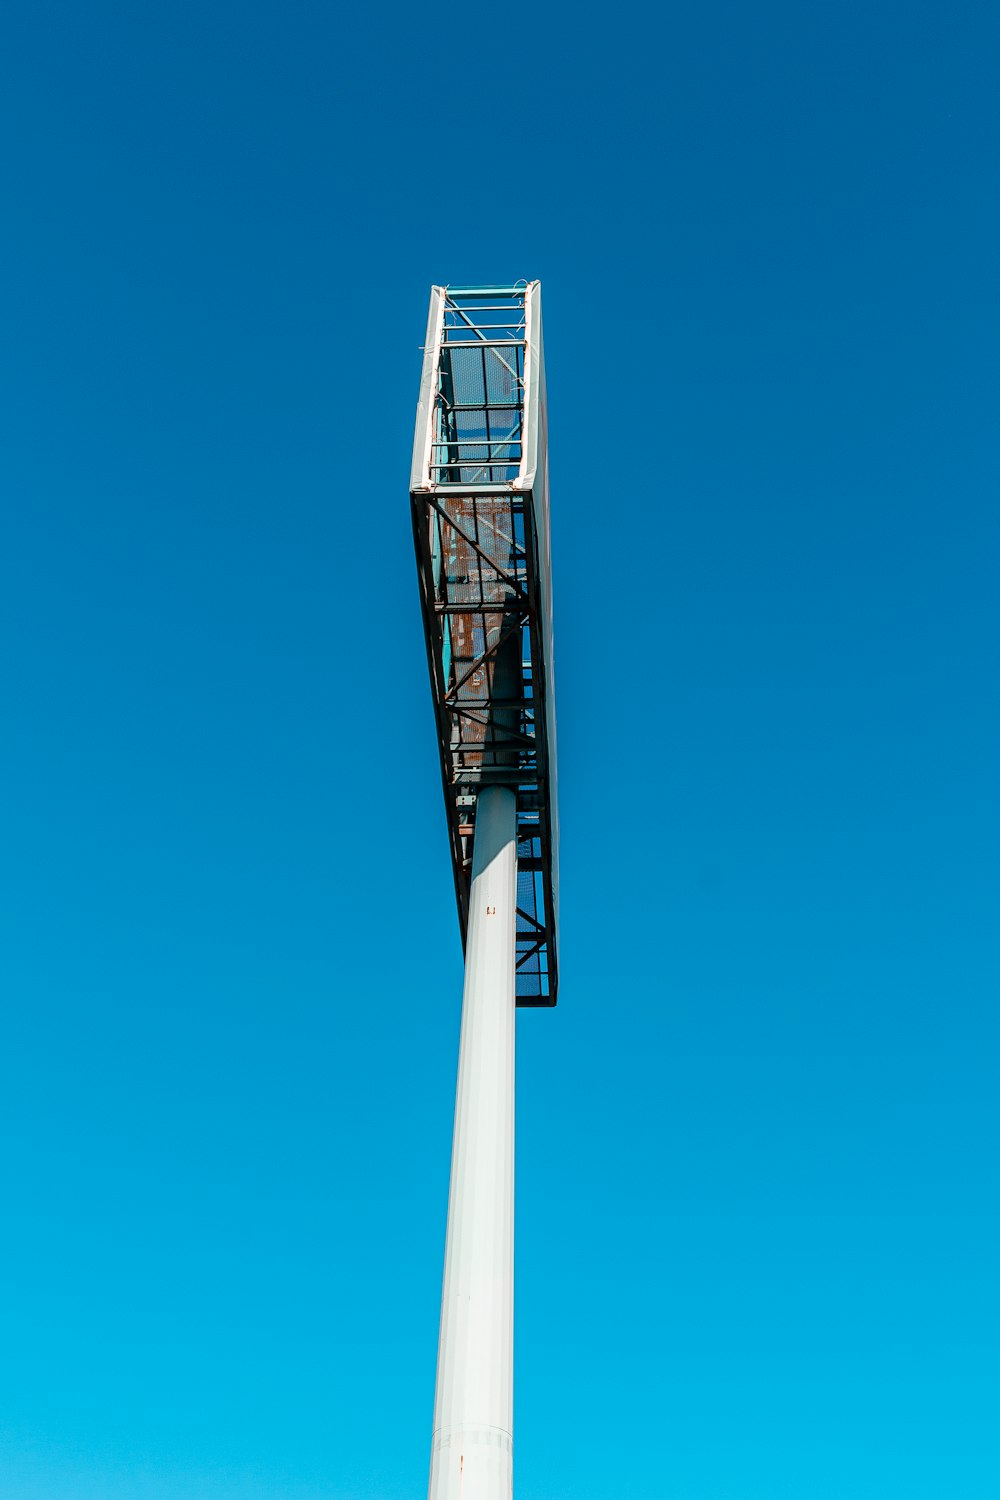 white and black tower under blue sky during daytime